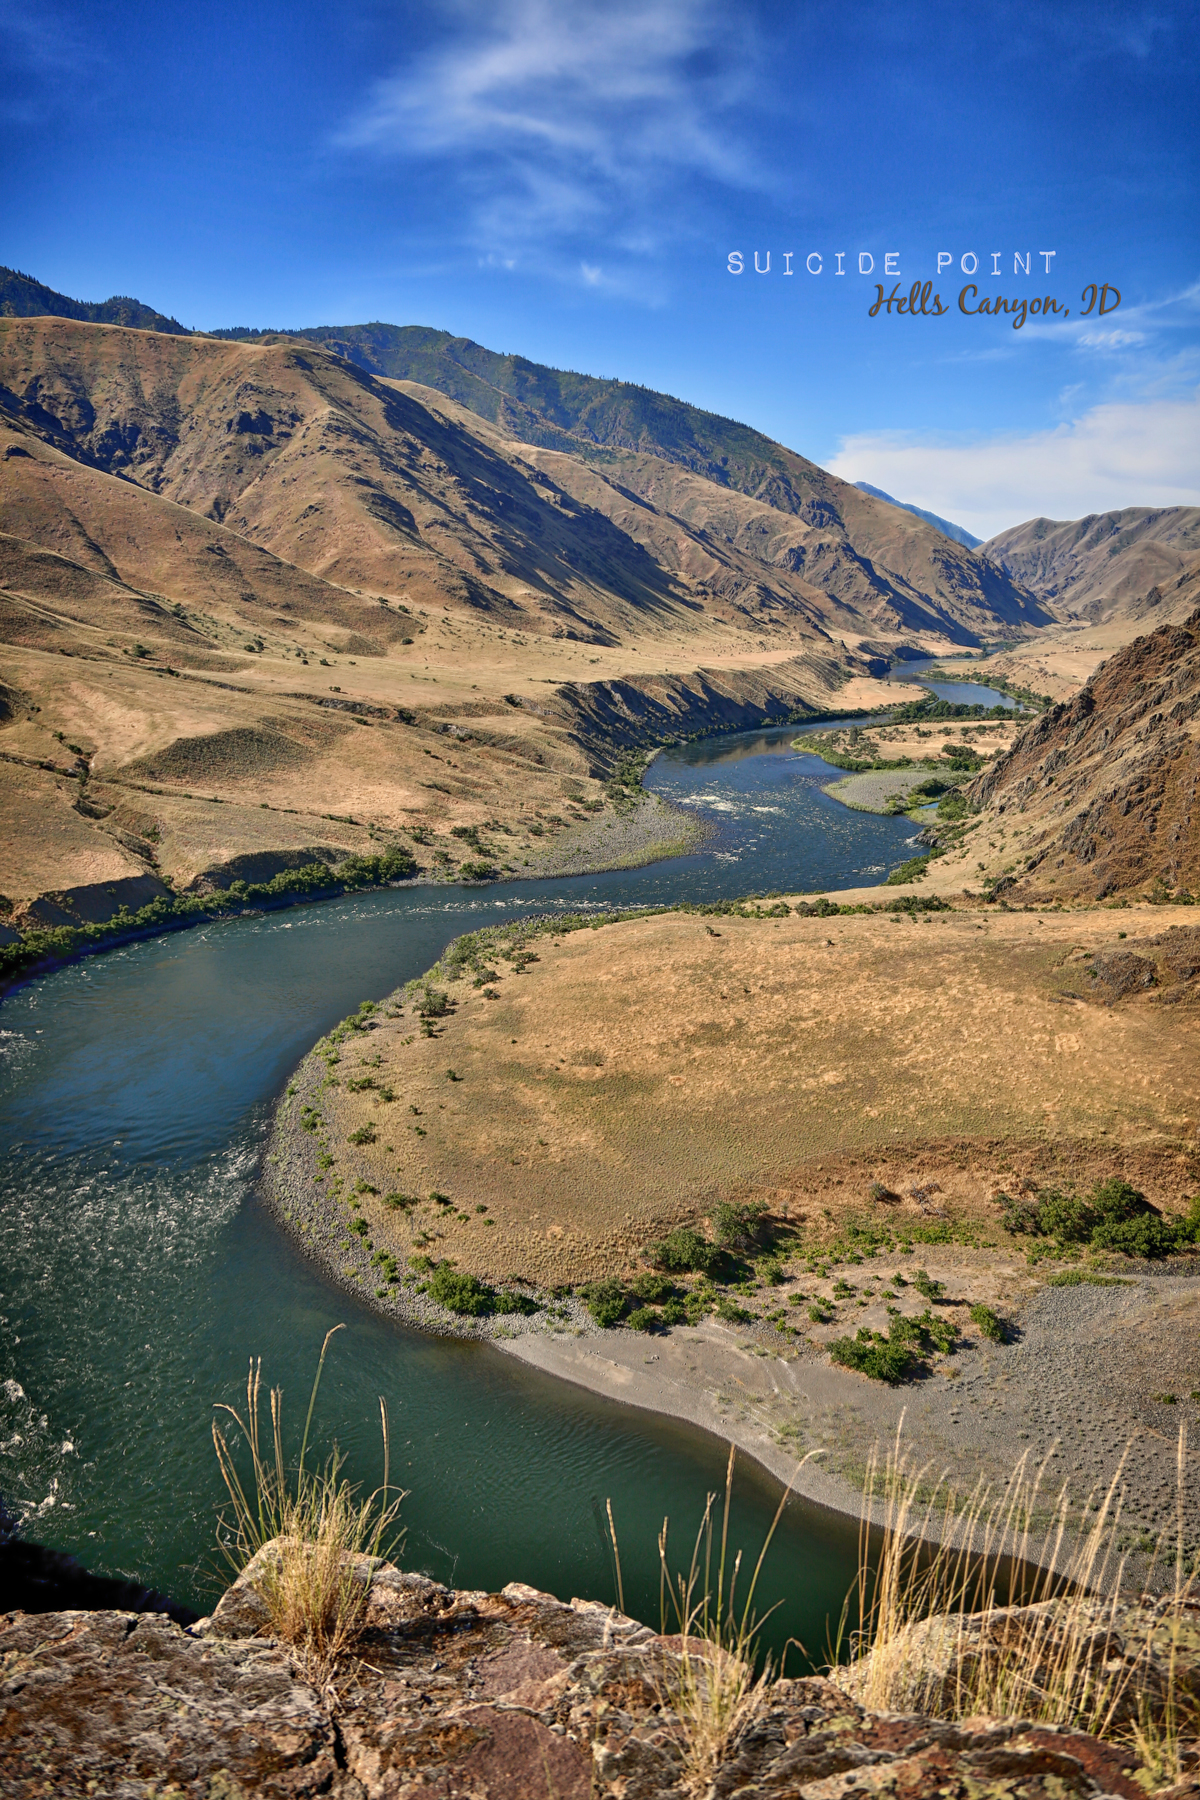 Standing ontop of Suicide Point in Hells Canyon, ID via J5MM.com